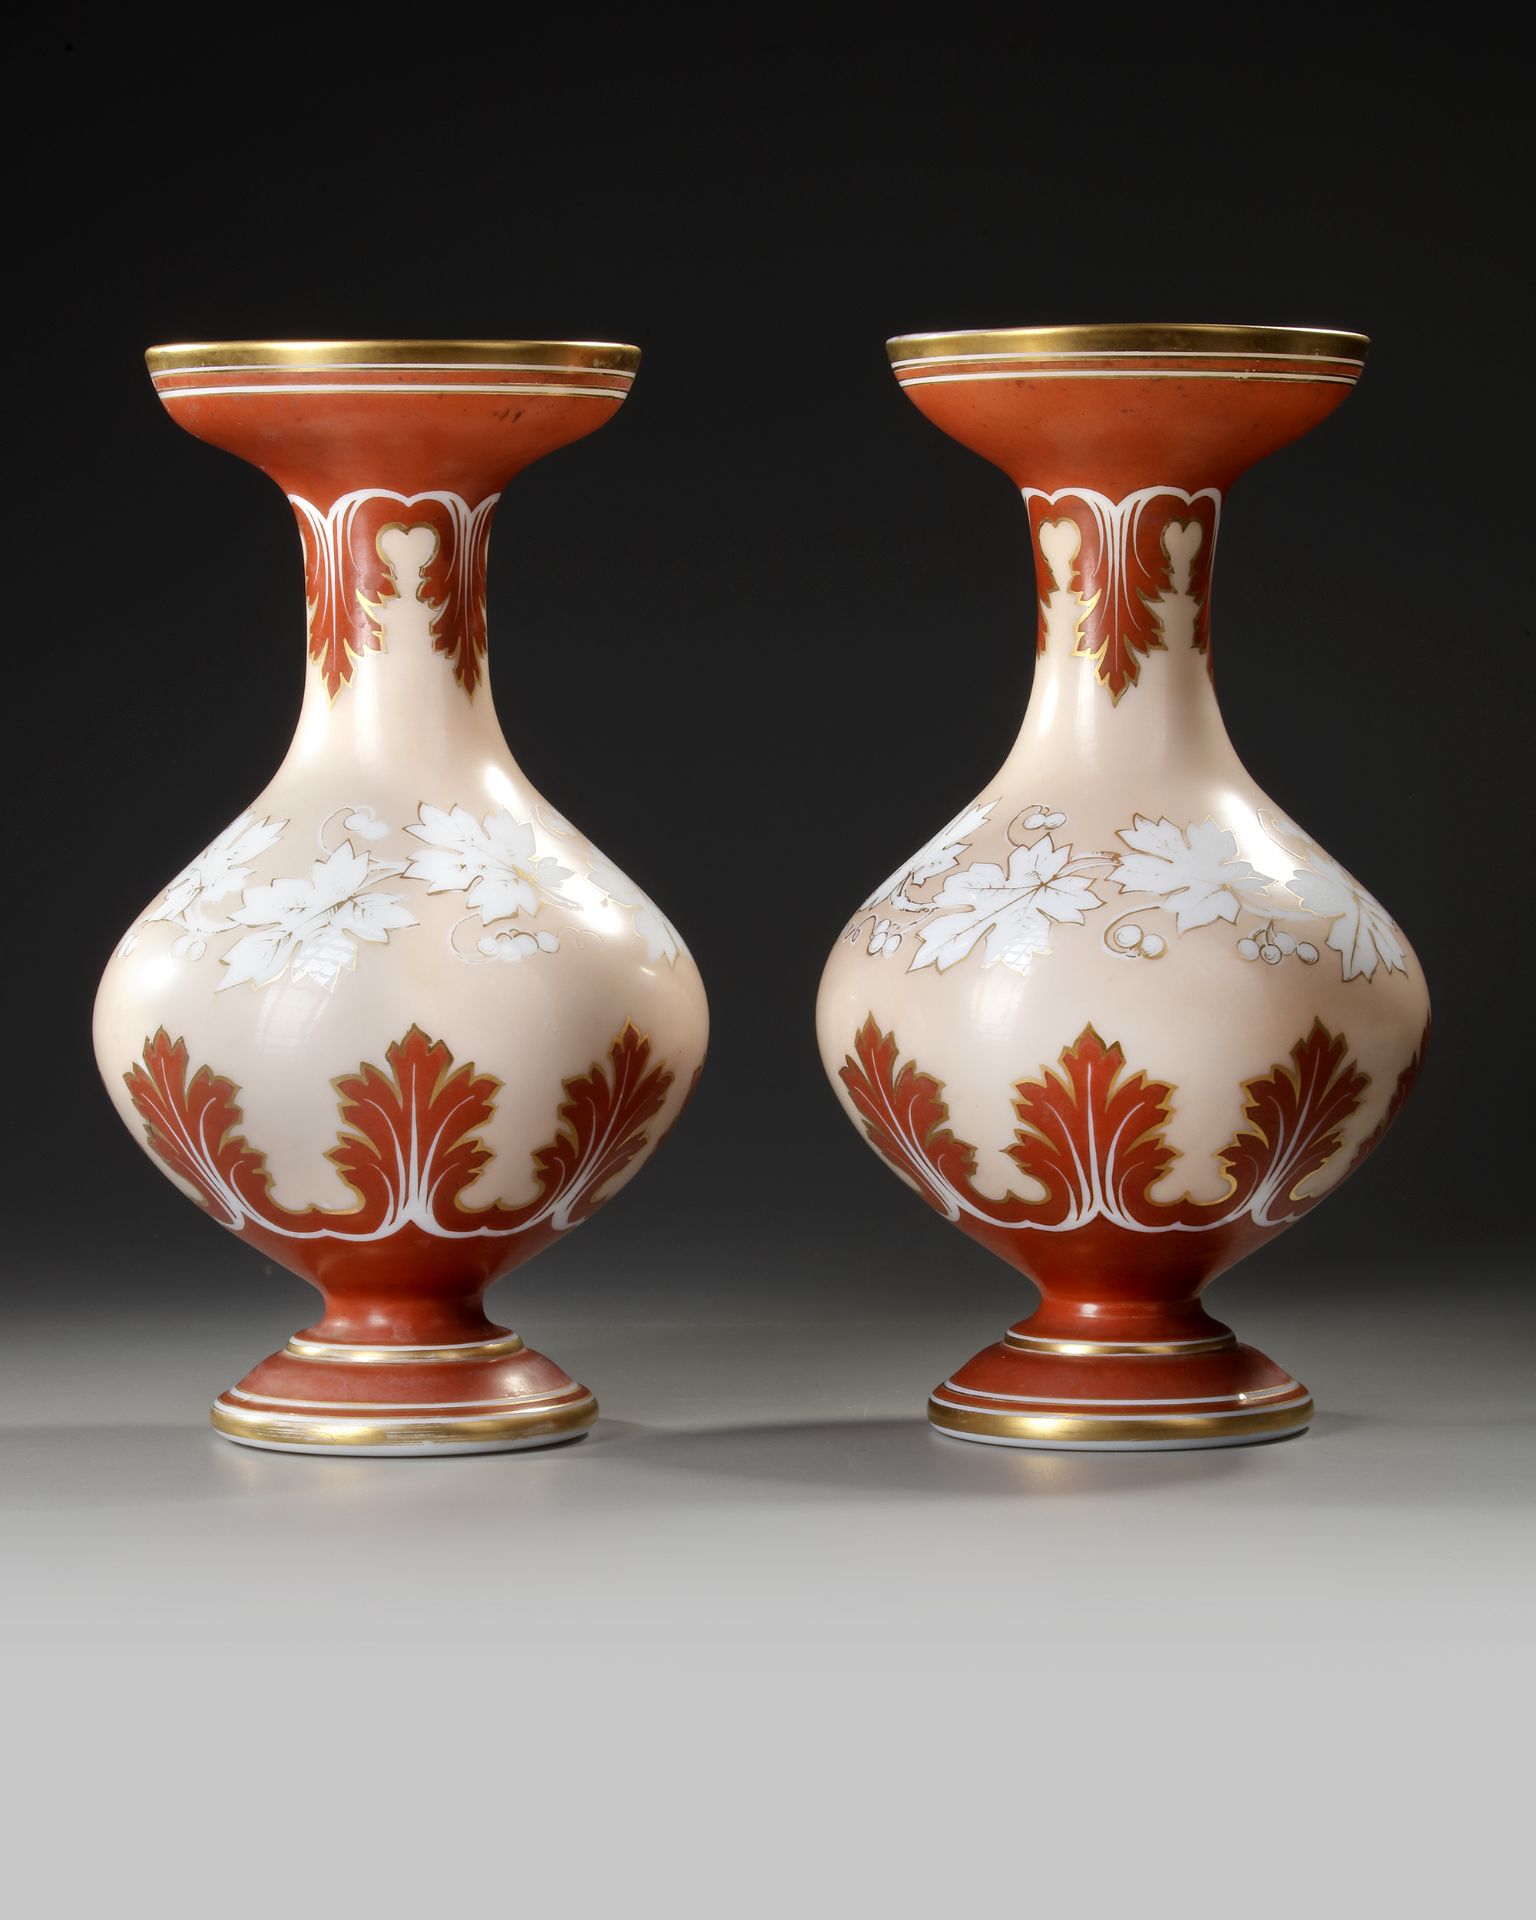 A PAIR OF OPALINE BACCARAT VASES, FRANCE, 19TH CENTURY - Image 2 of 6